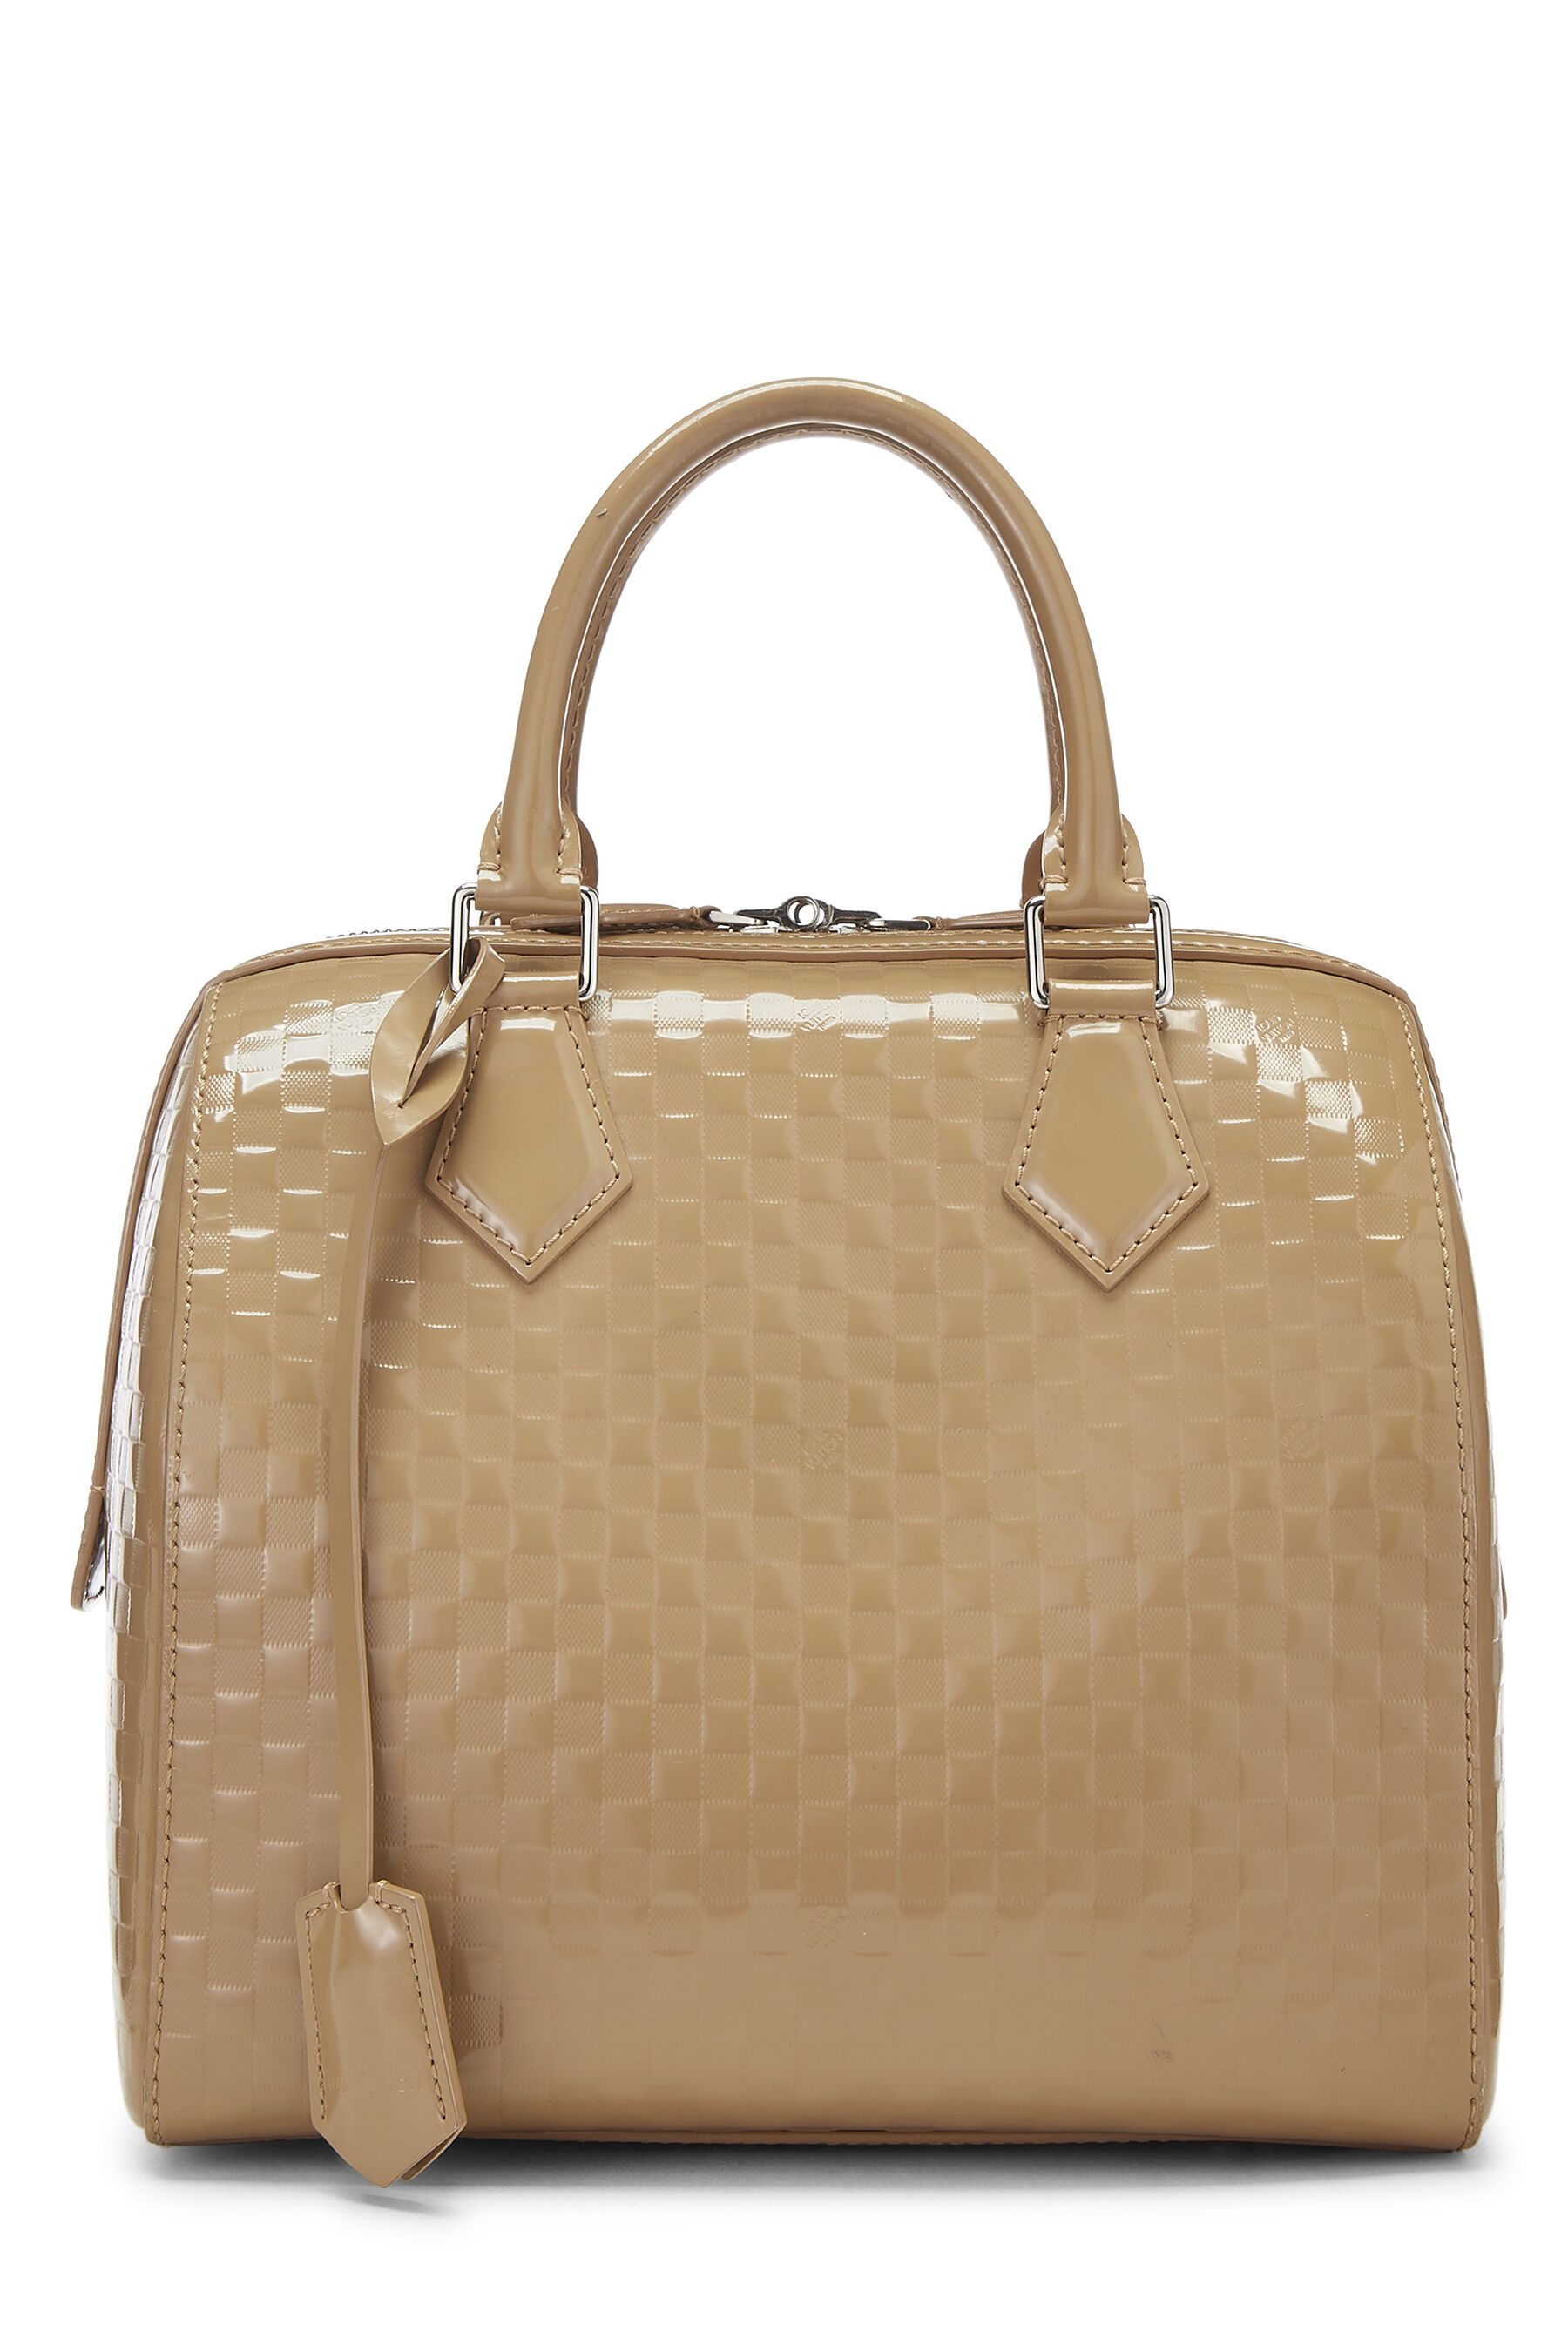 Louis Vuitton Green Damier Cubic Fabric and Leather Limited Edition Speedy  Cube